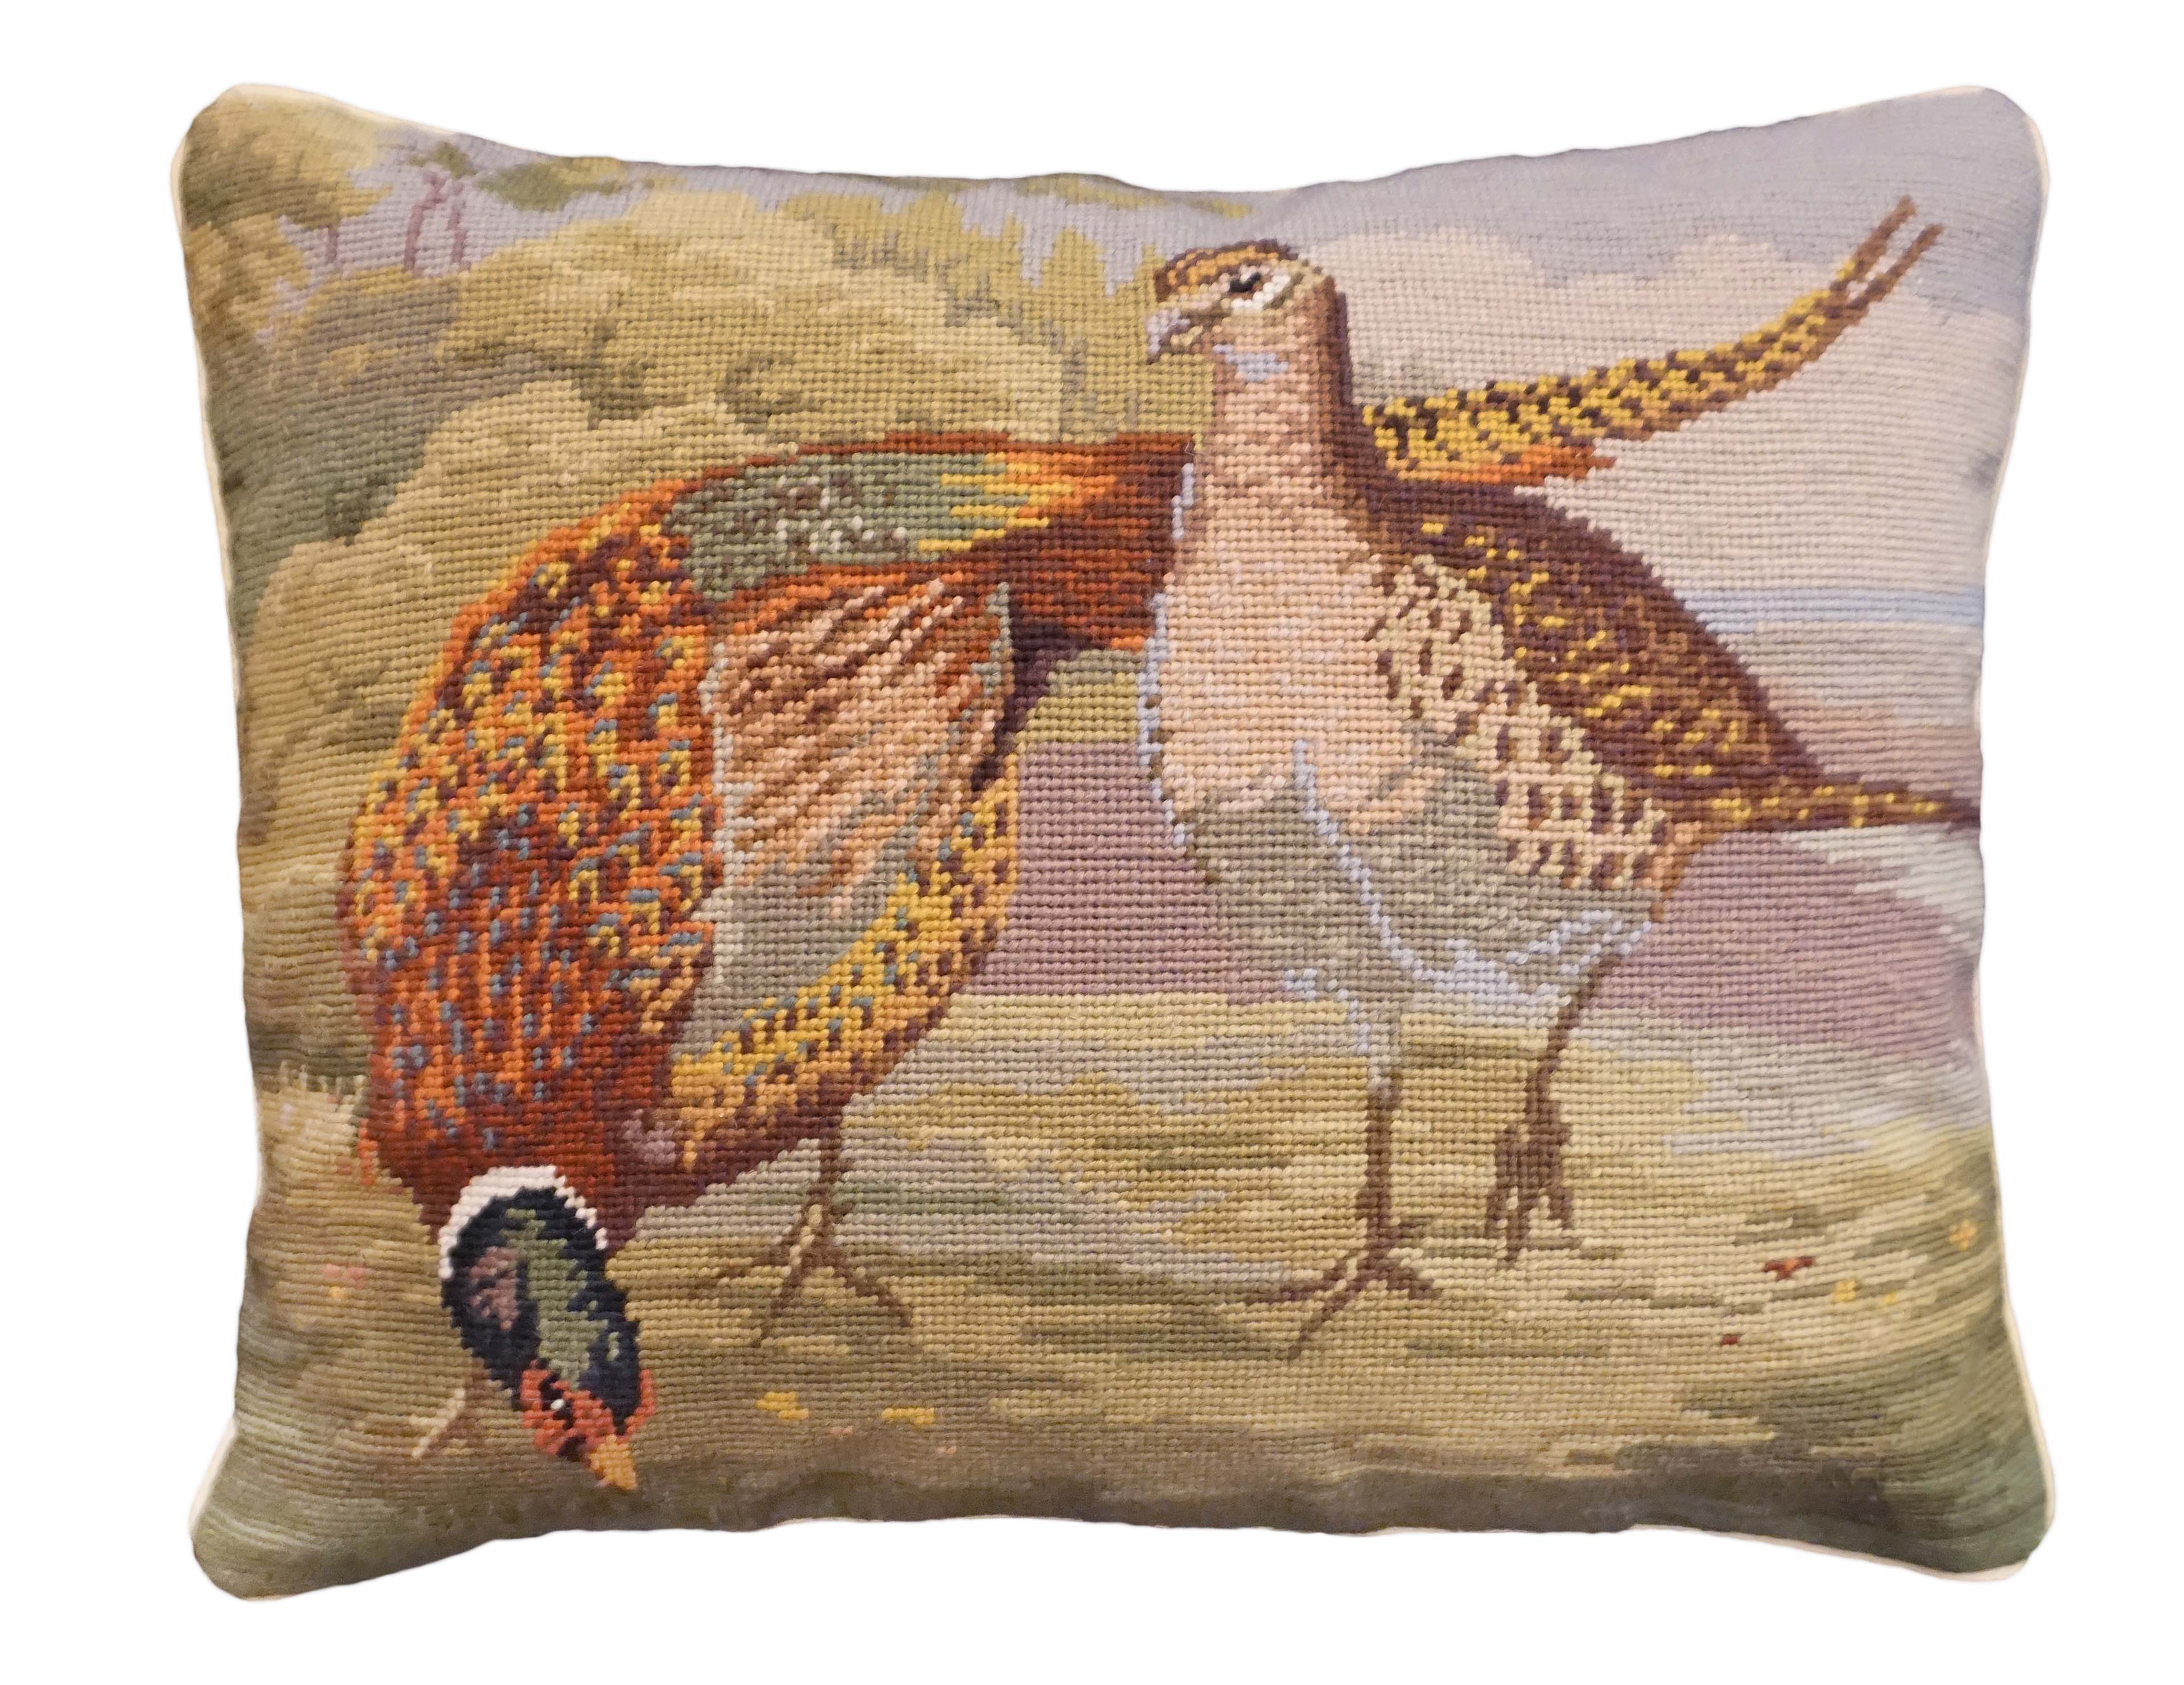 Deluxe Pillows Three Roosters - 16 x 20 in. Needlepoint Pillow